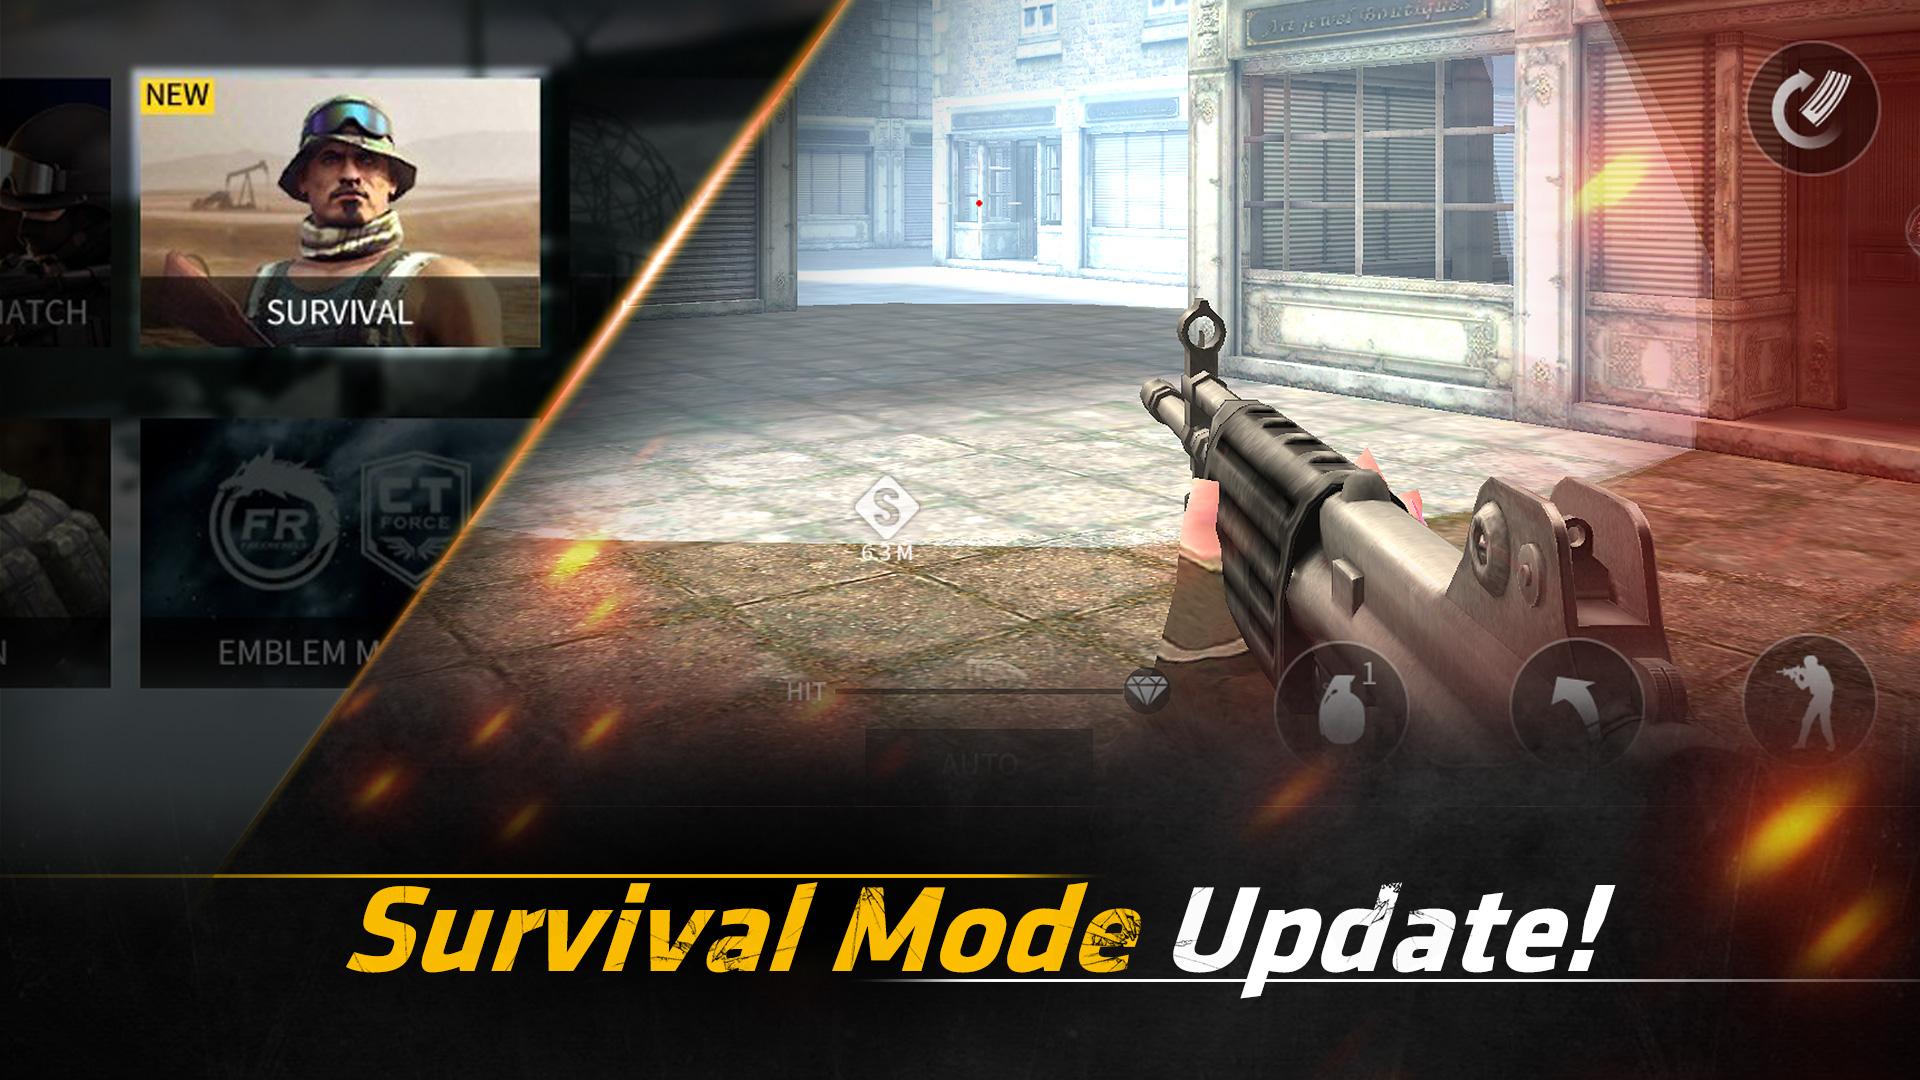 Point Blank: Strike for Android - APK Download - 